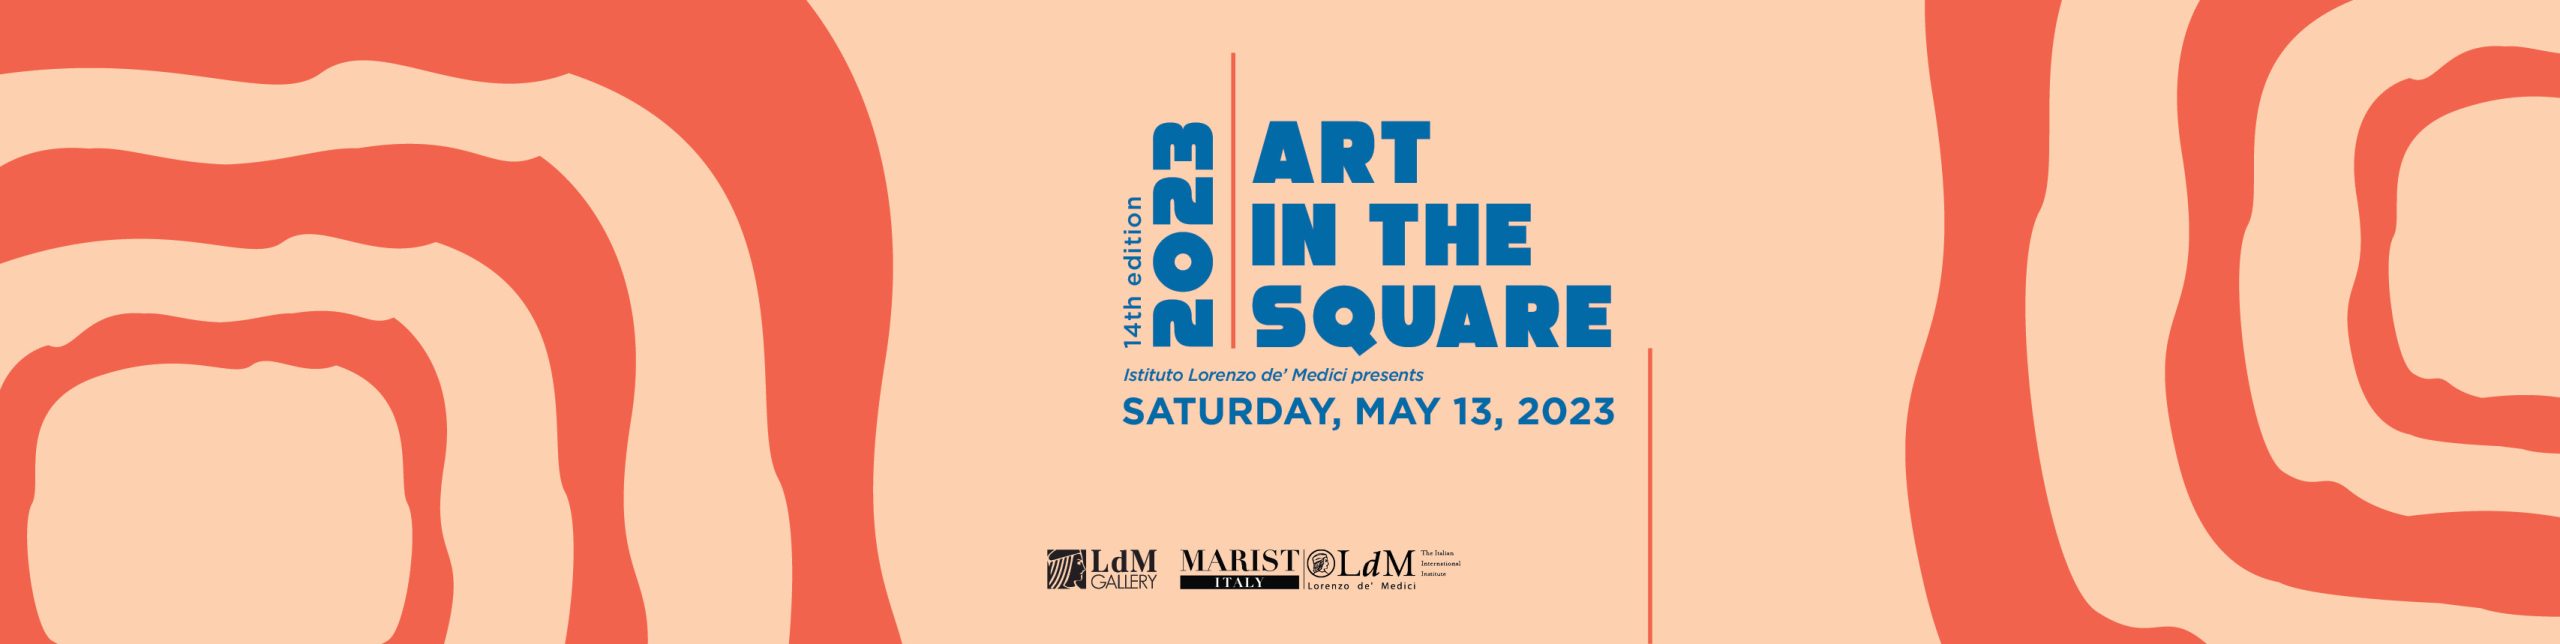 Art In The Square 2023 Web Scaled 